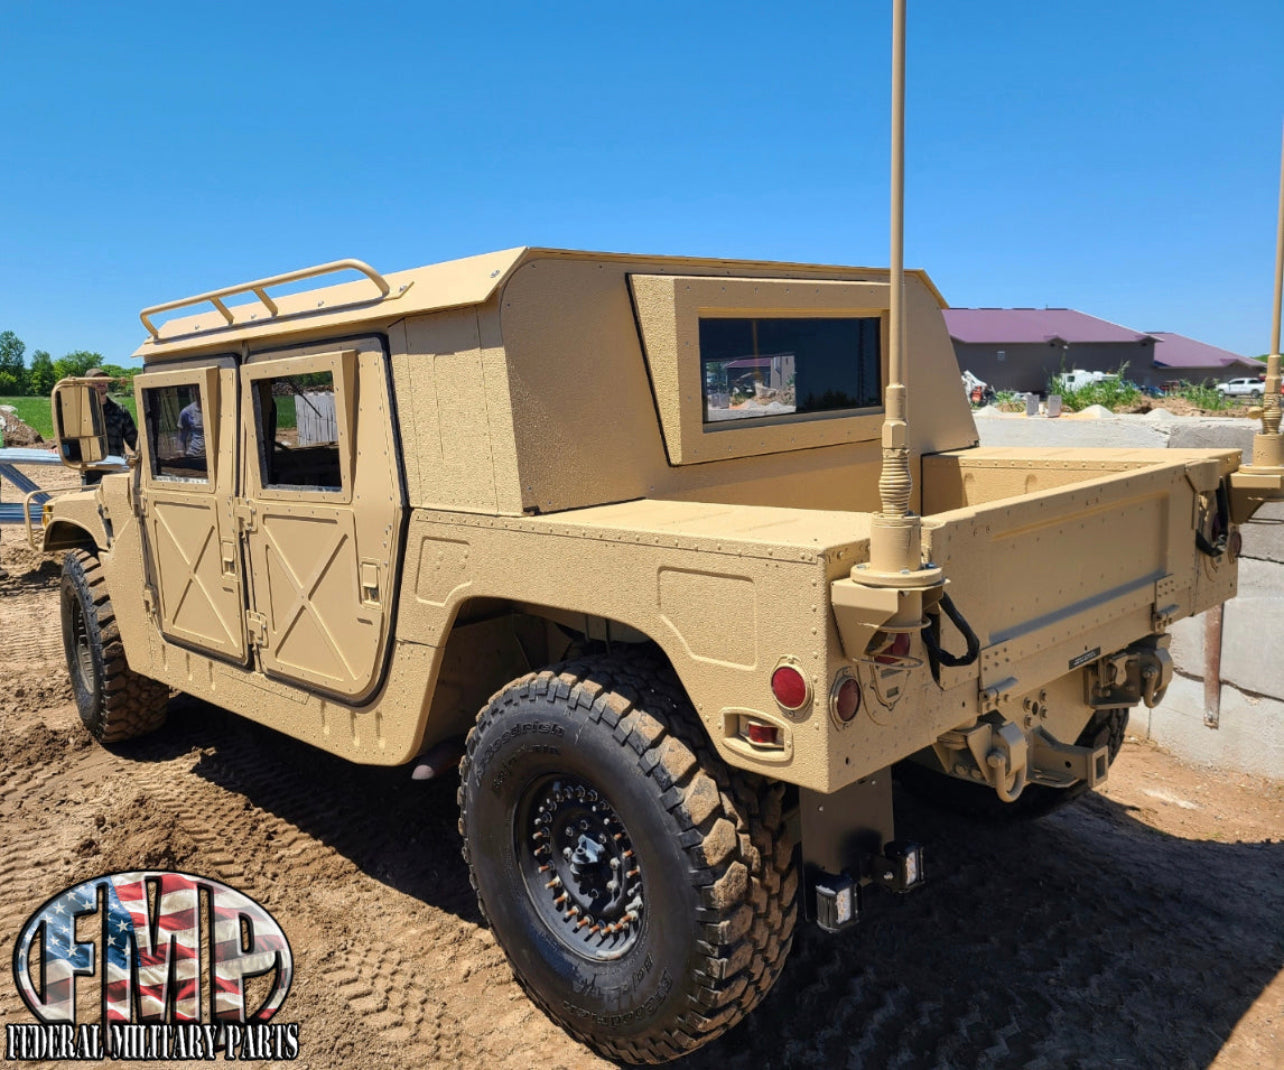 Roof Grab Rails Pair Only for 4-Man Military Humvee